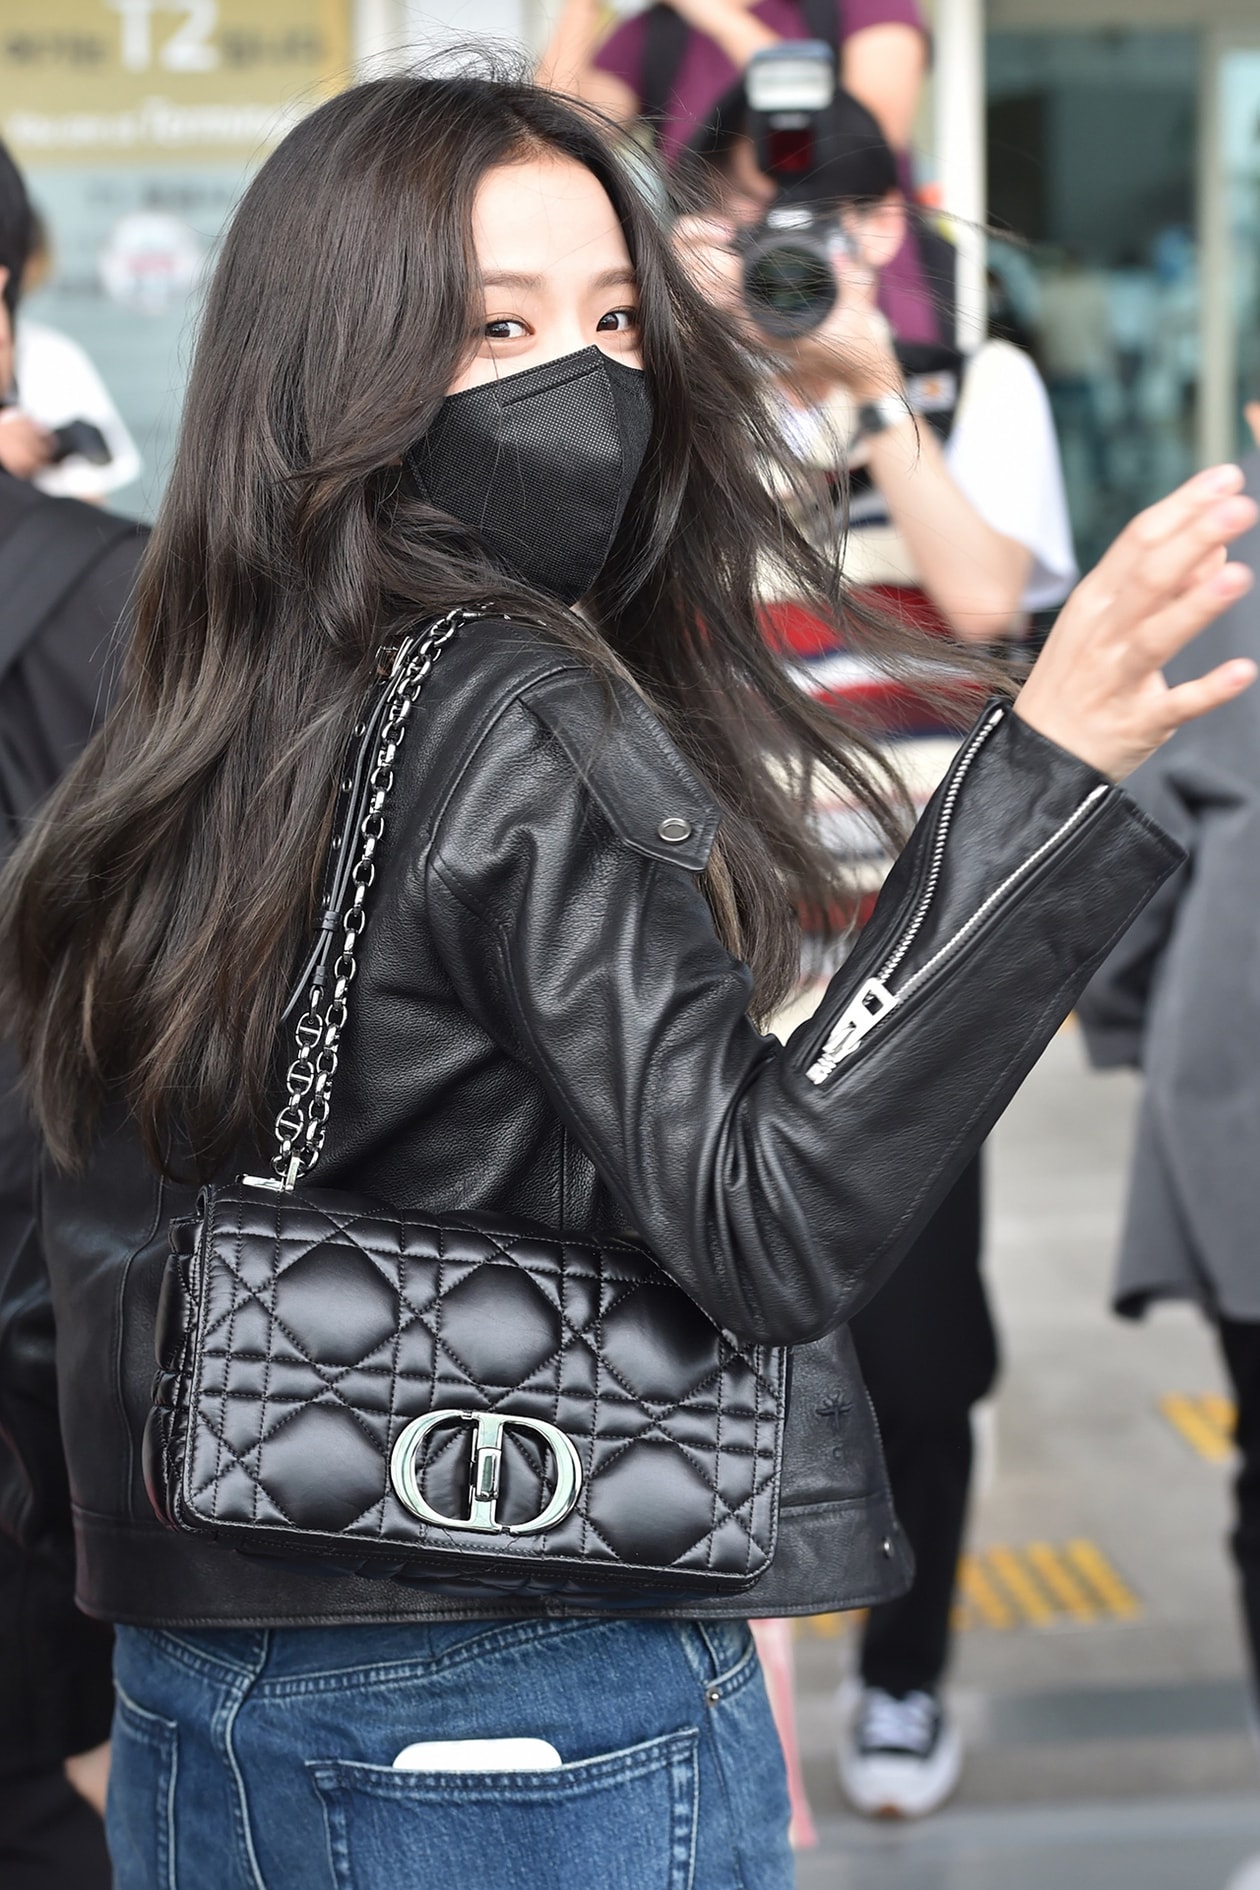 Blackpink's Jisoo Attends the Dior SS22 Show as the Brand's Global  Ambassador